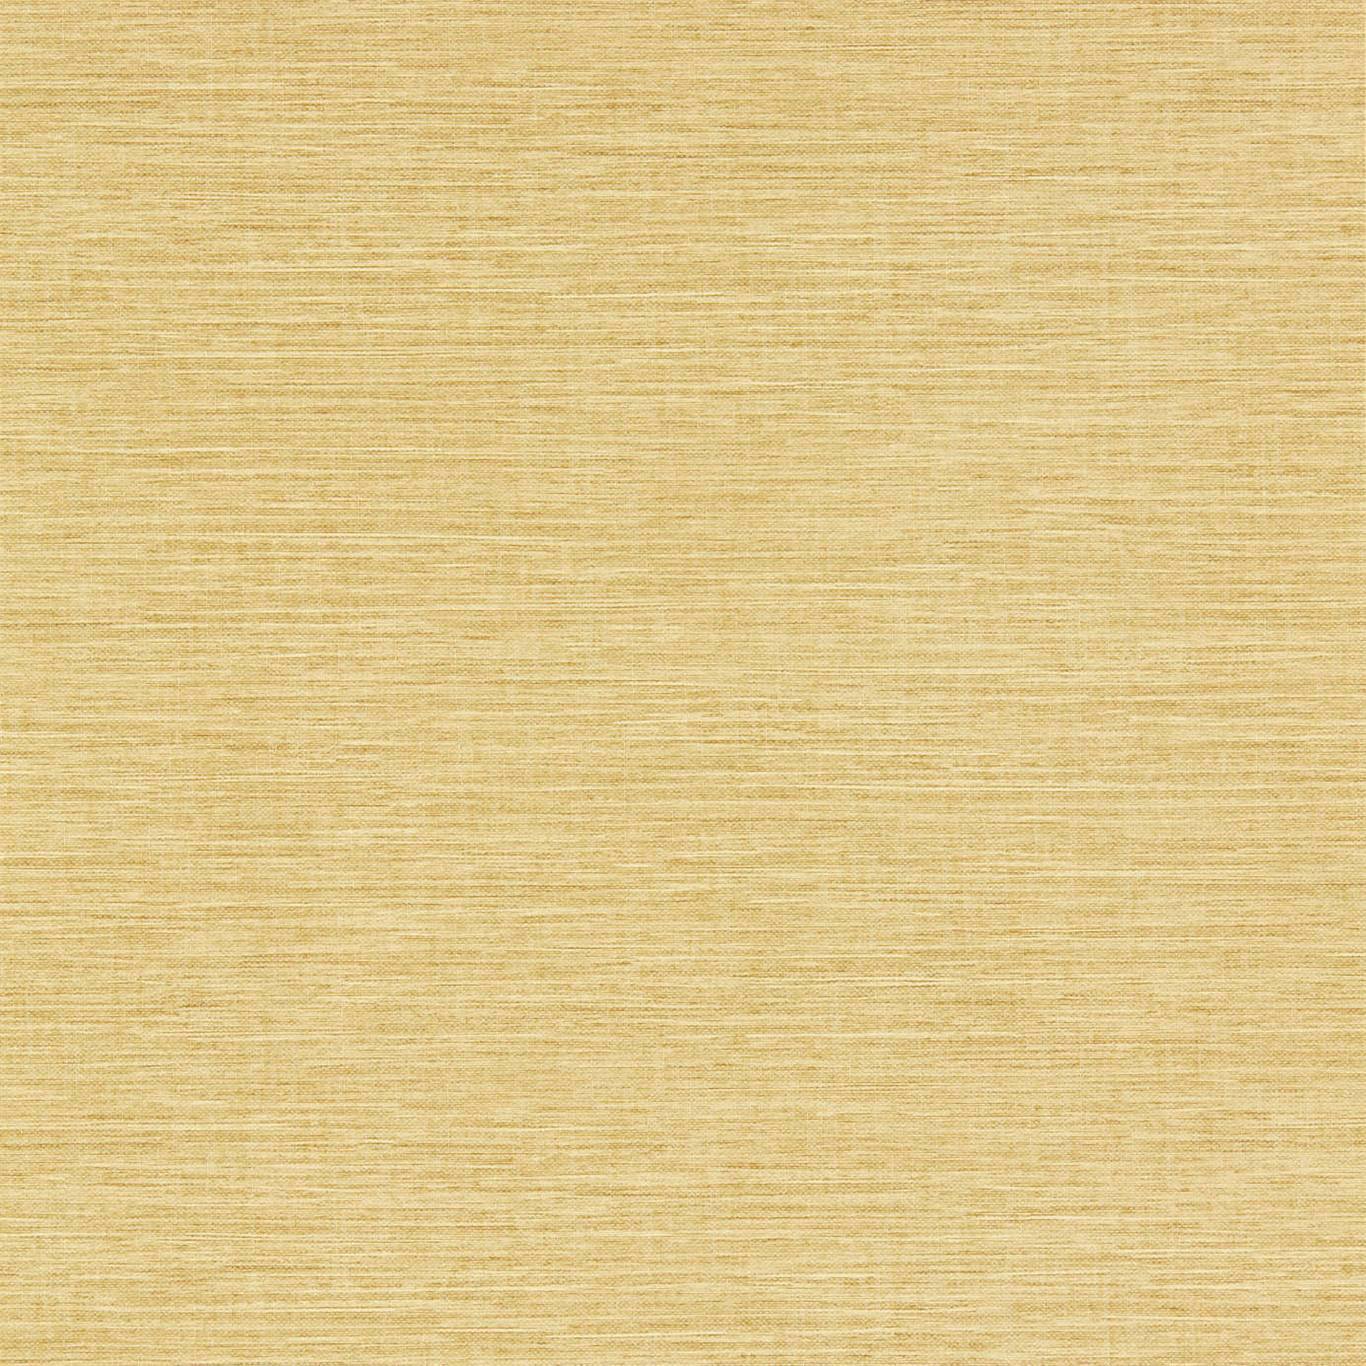 Chronicle Straw Wallpaper HTWW112100 by Harlequin